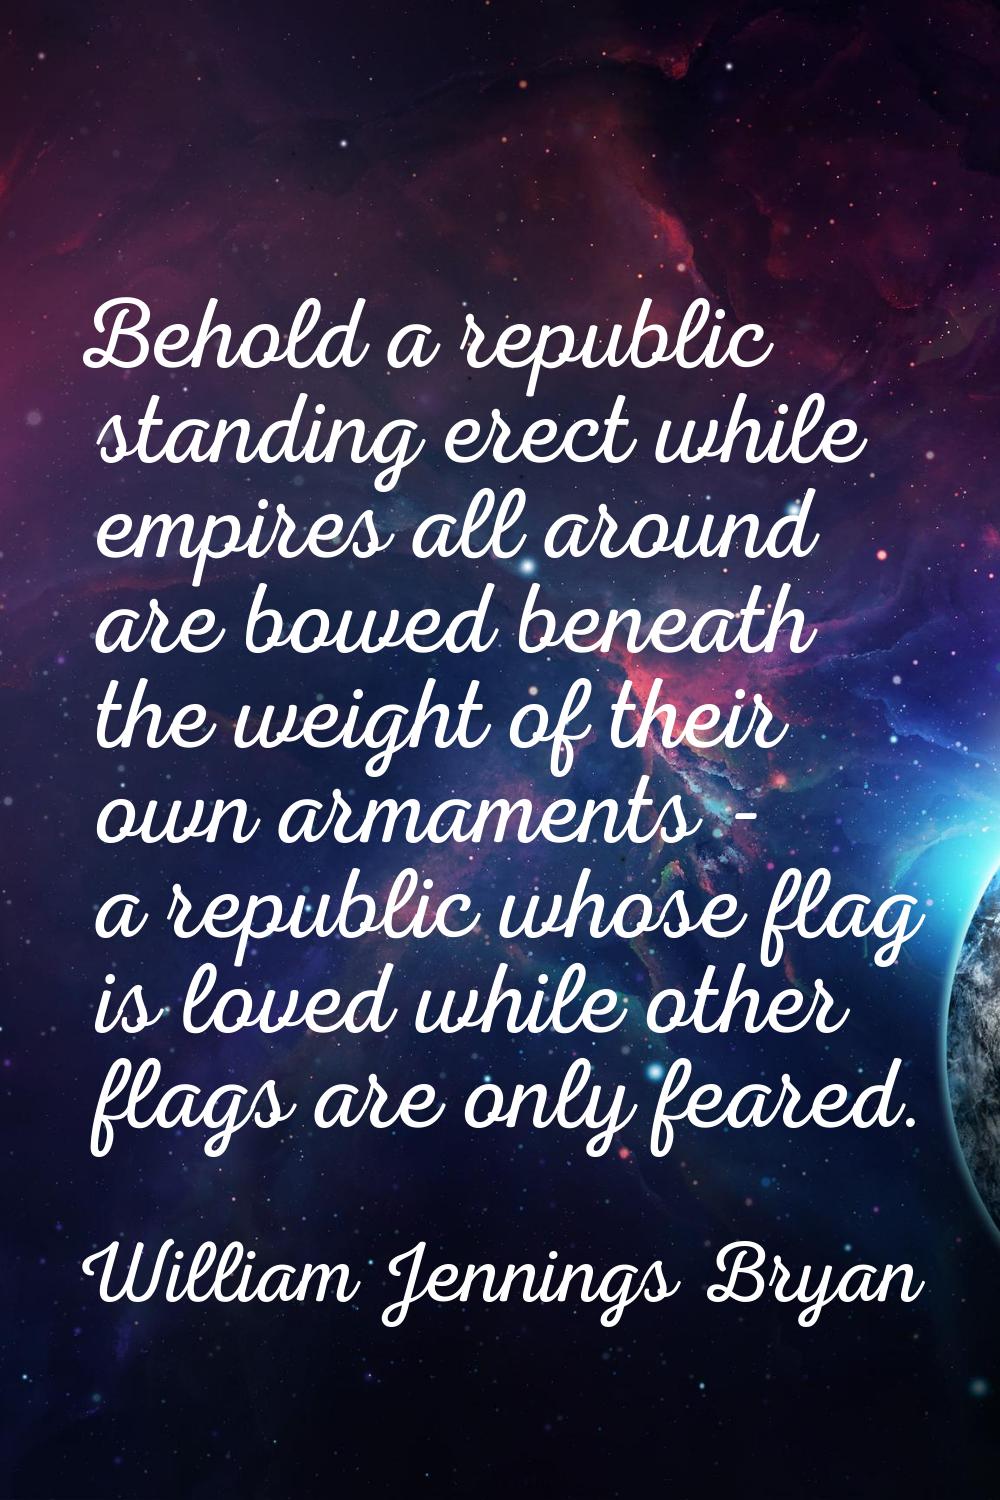 Behold a republic standing erect while empires all around are bowed beneath the weight of their own